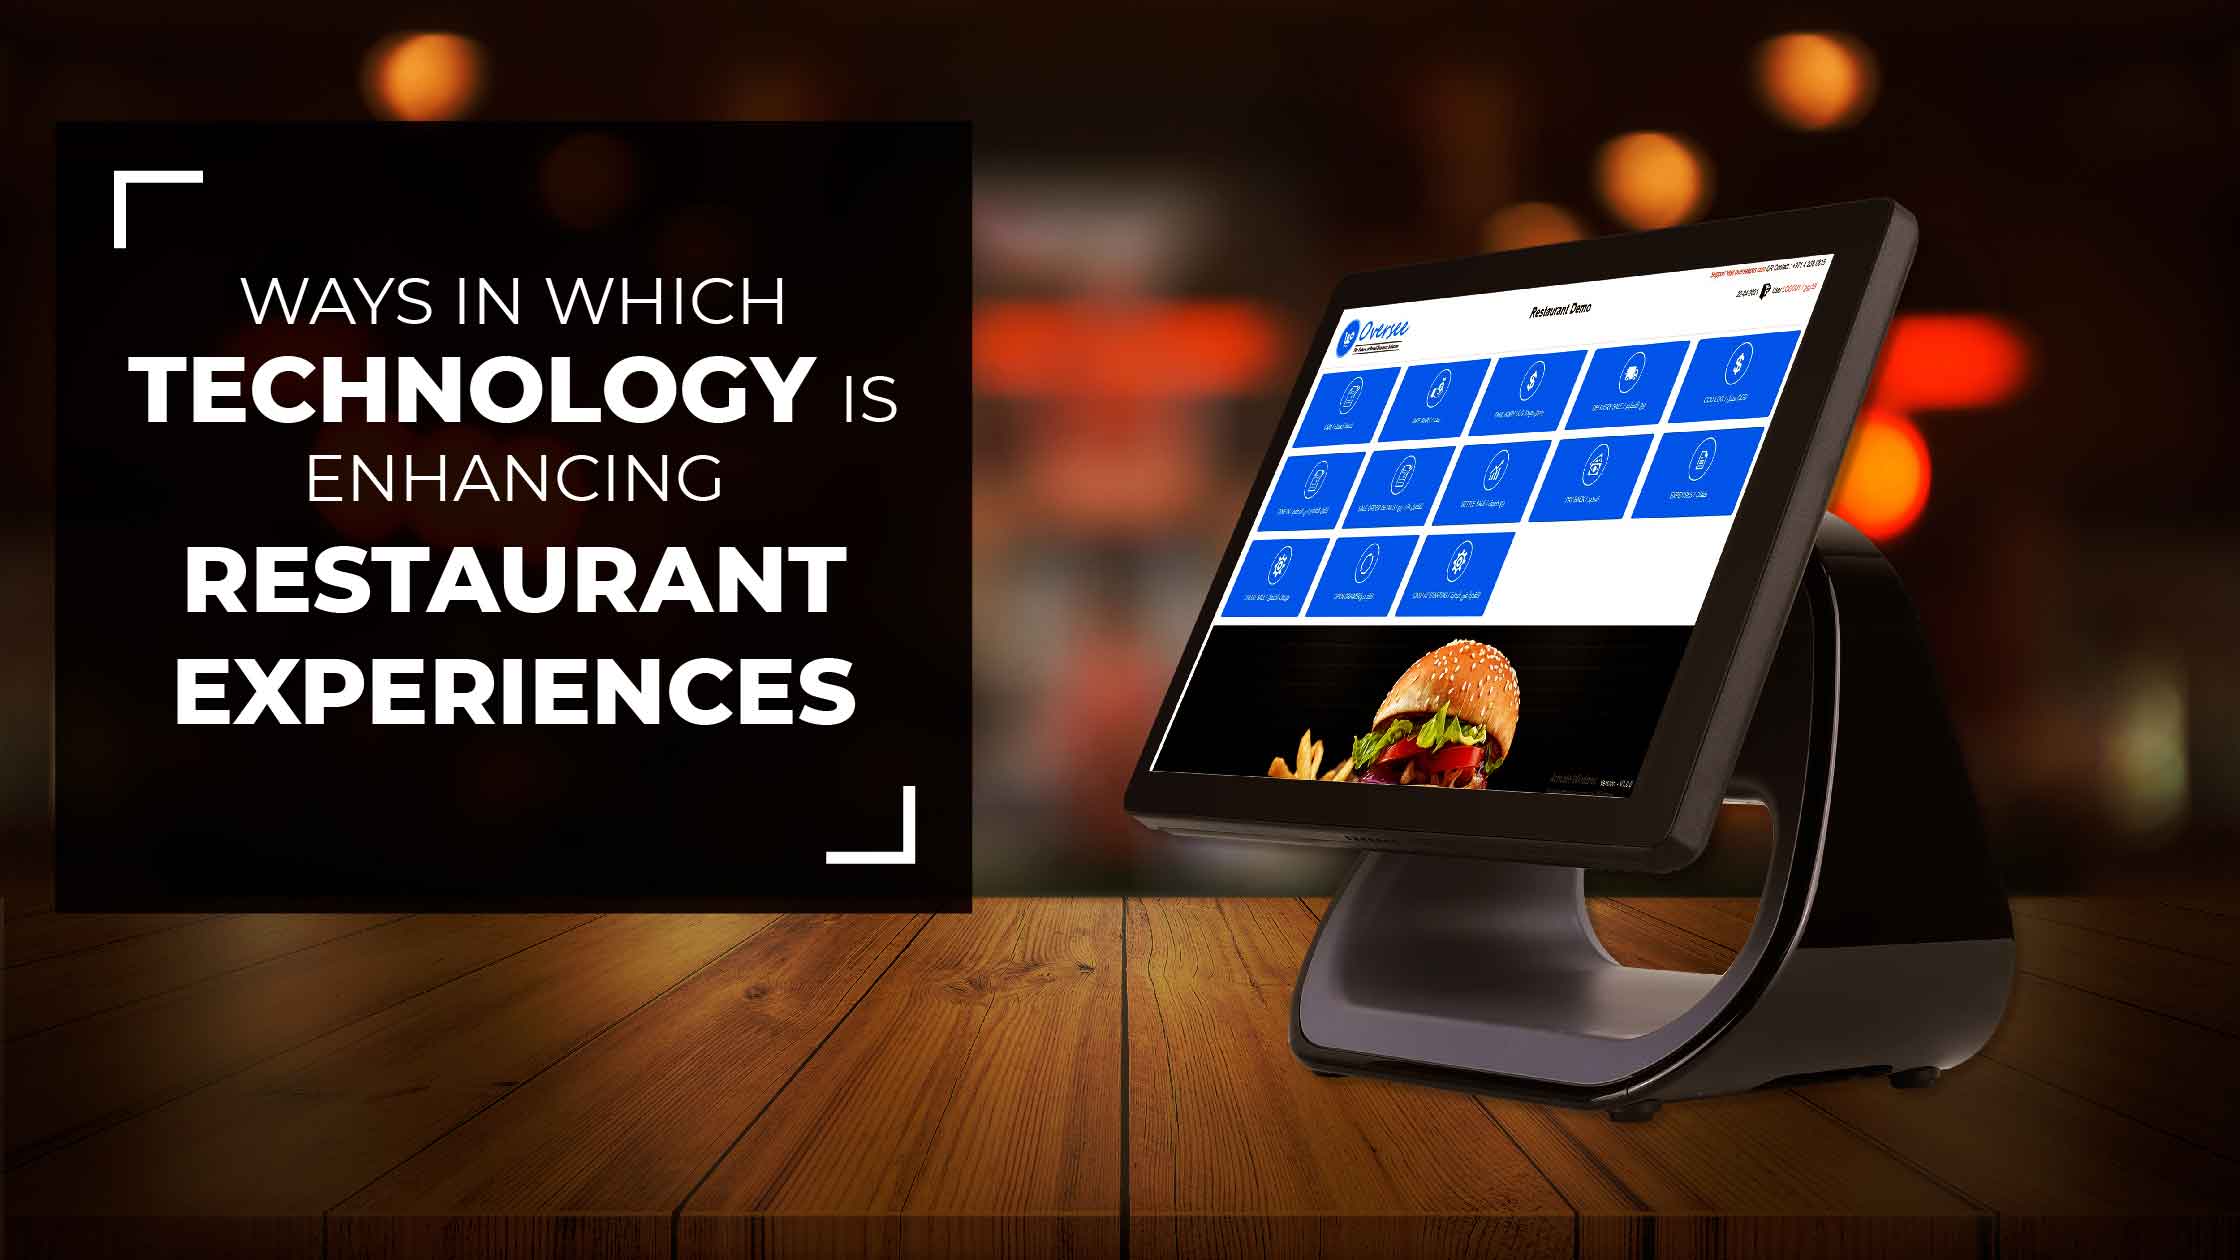 Ways in which technology is enhancing restaurant experiences